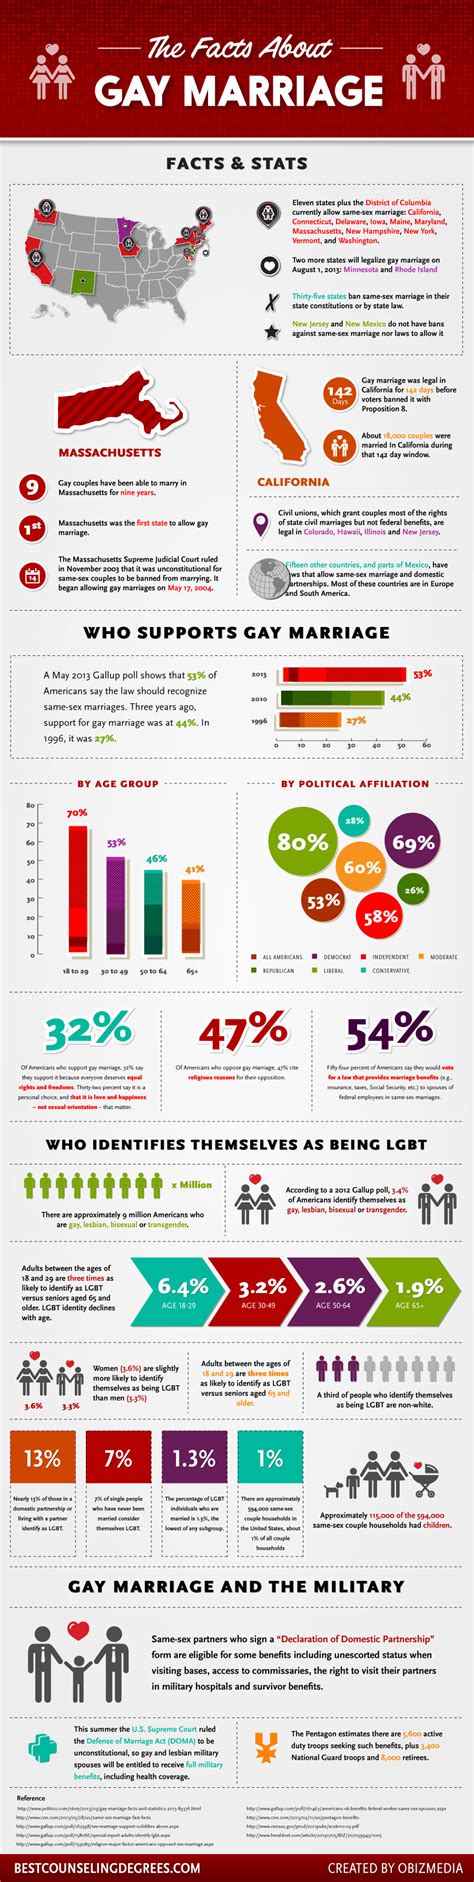 gay marriage facts and stats infographic lgbt marriage and facts